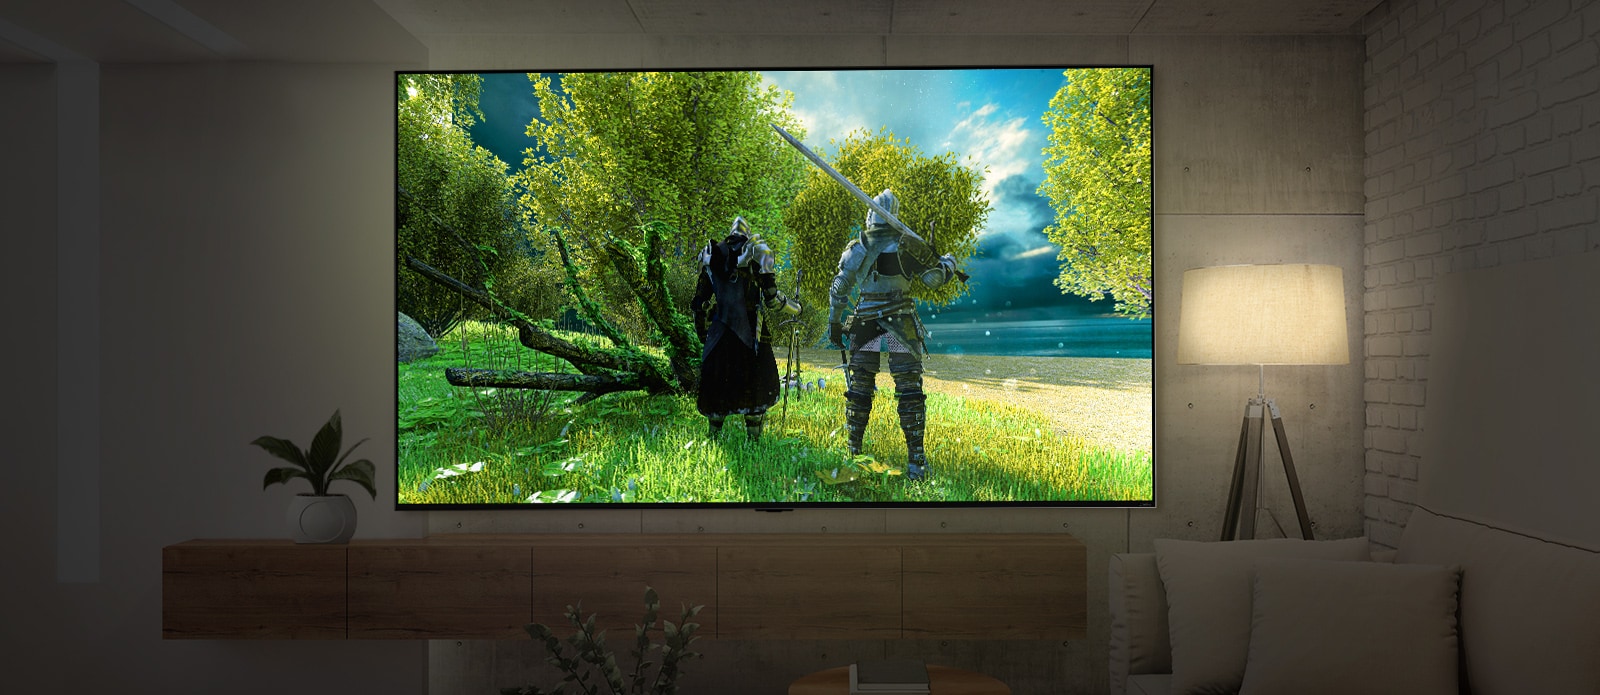 A large-screen TV mounted on a wall in a dark room. The scene shows a rear view of two characters wearing armor.